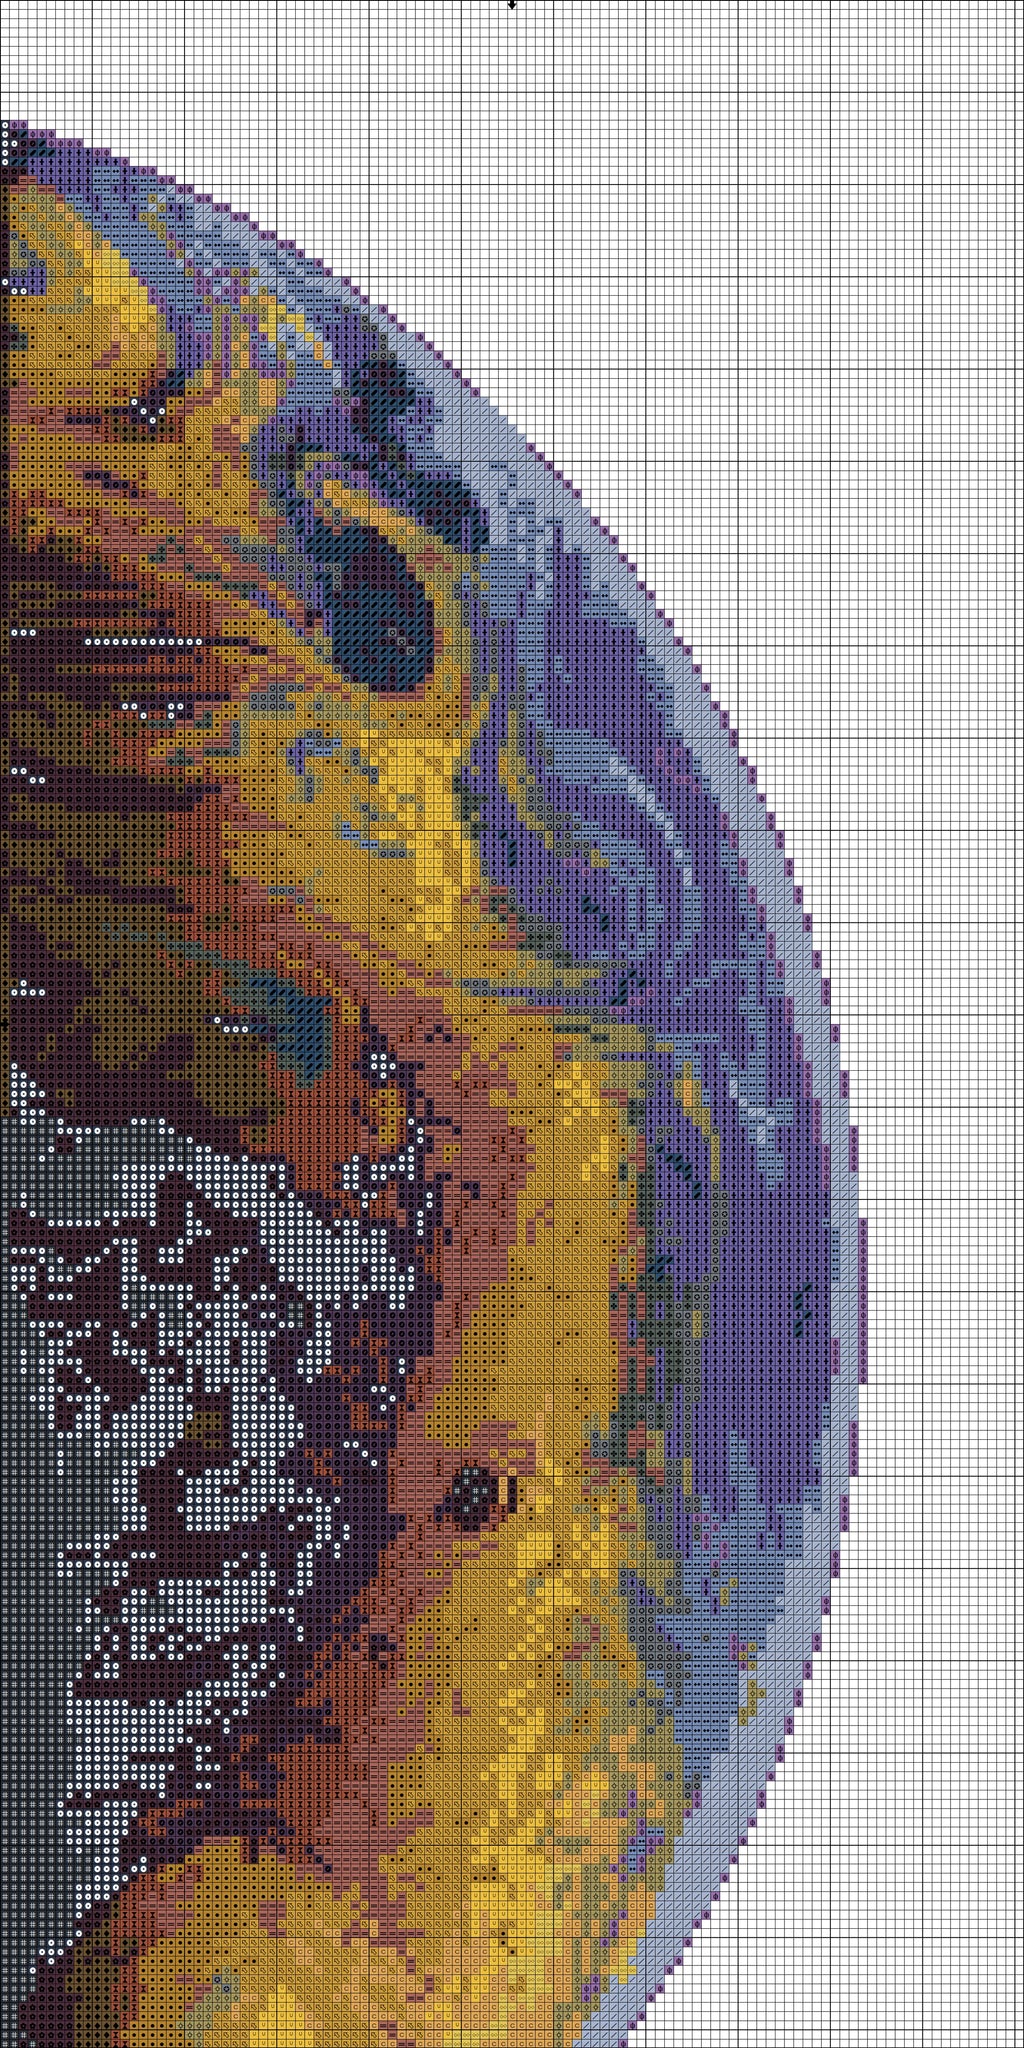 Blue planet in cosmos cross stitch pattern